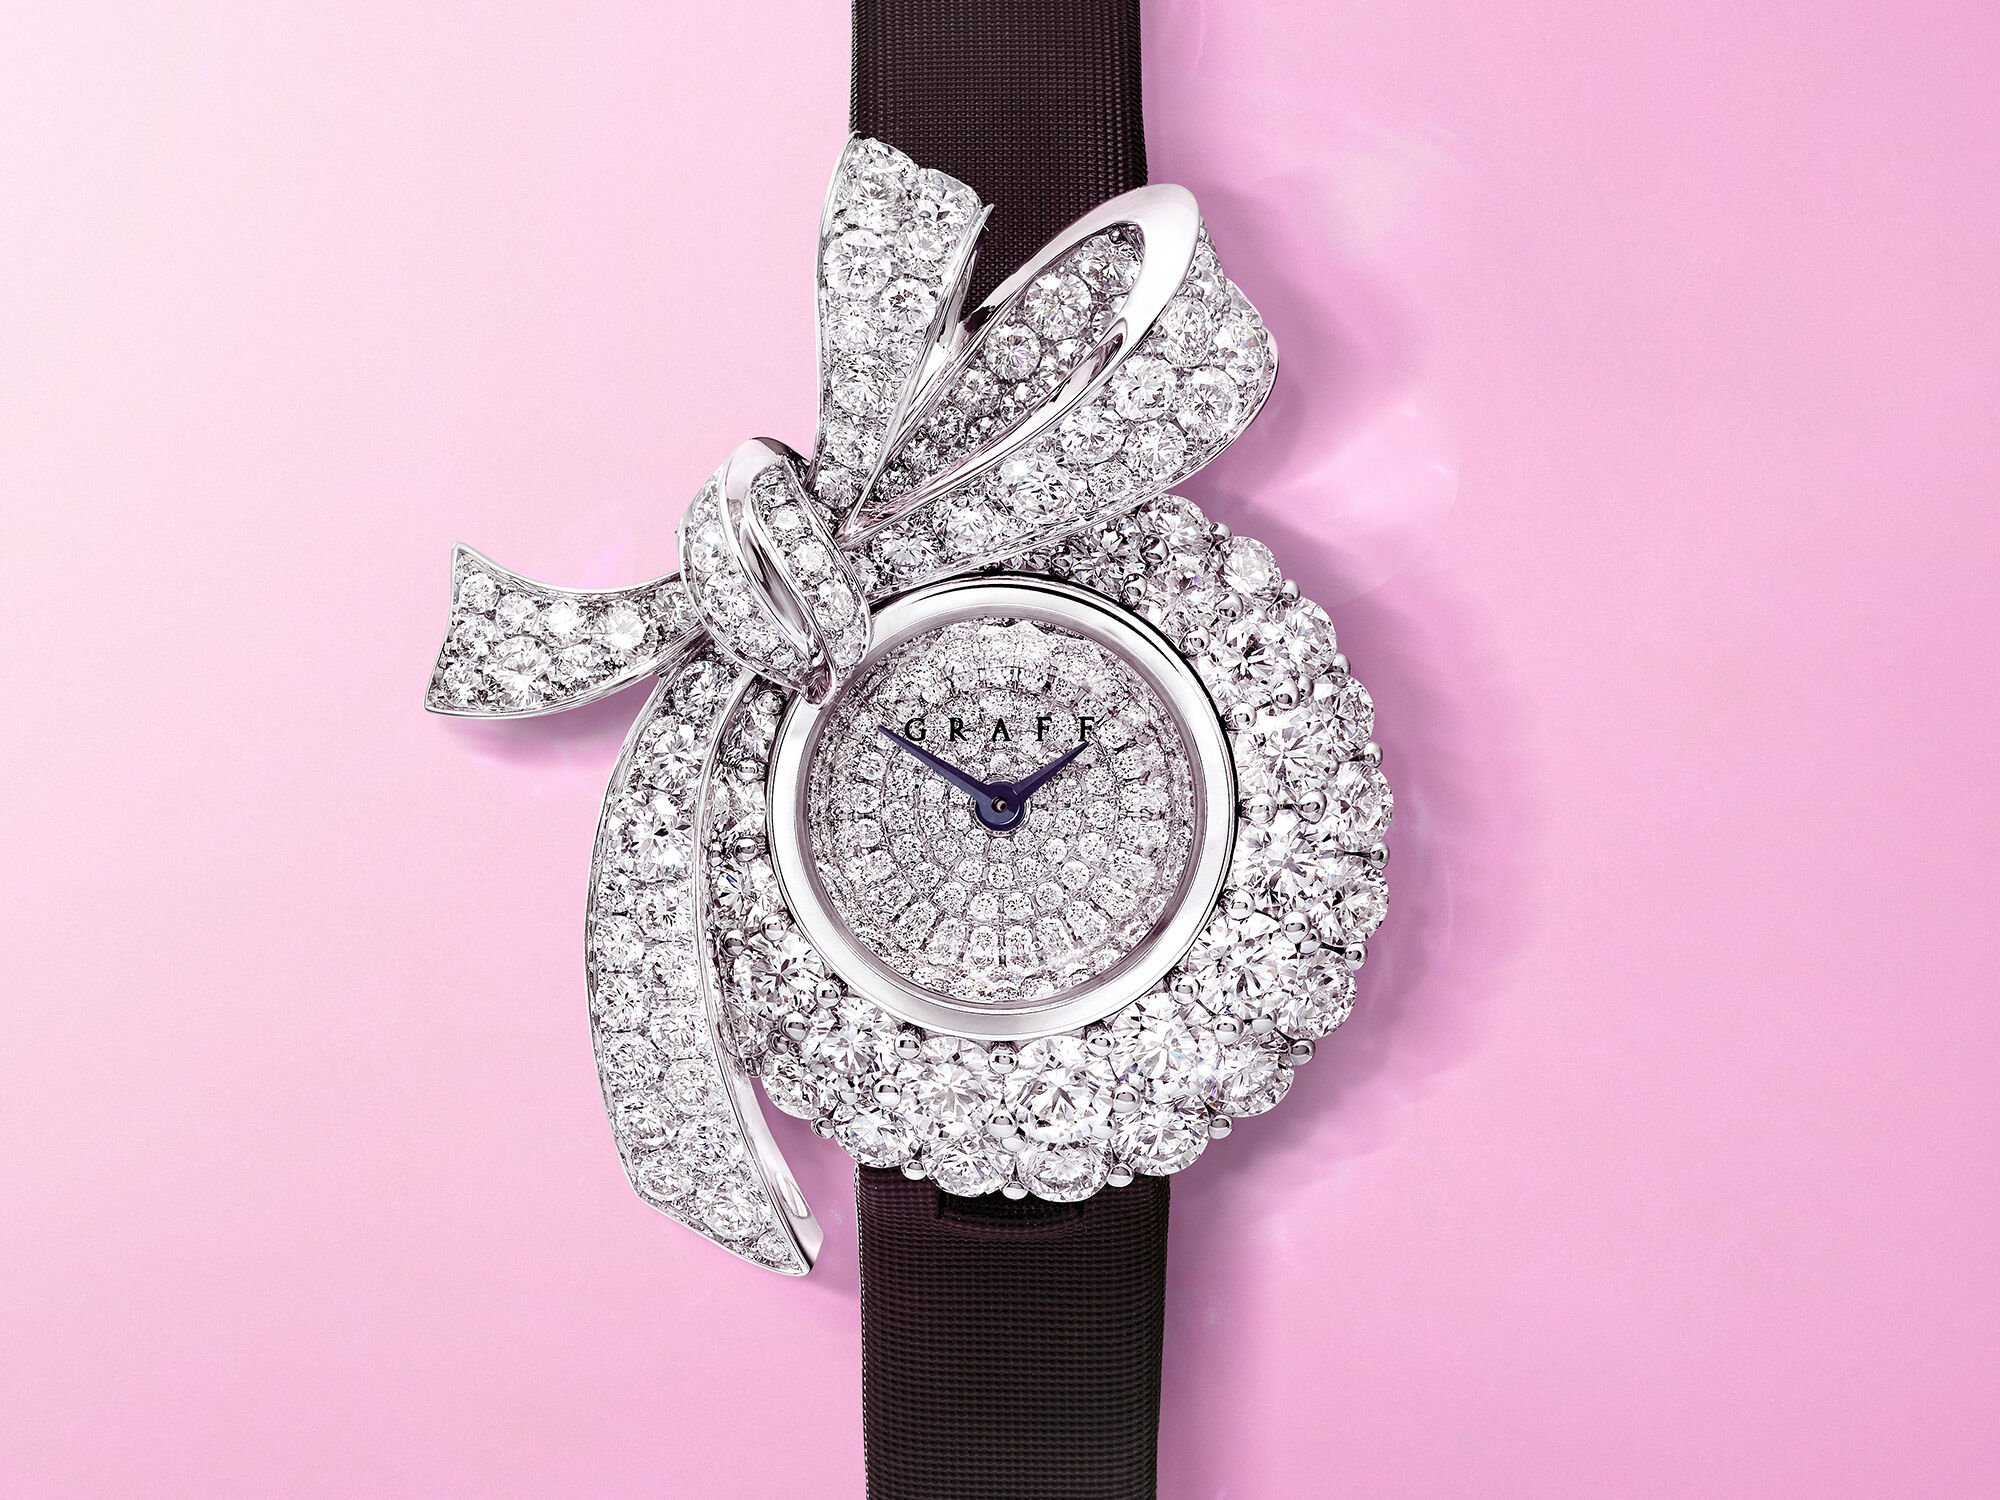 A Graff Tilda's Bow diamond watch with pear shape drop on a pink background